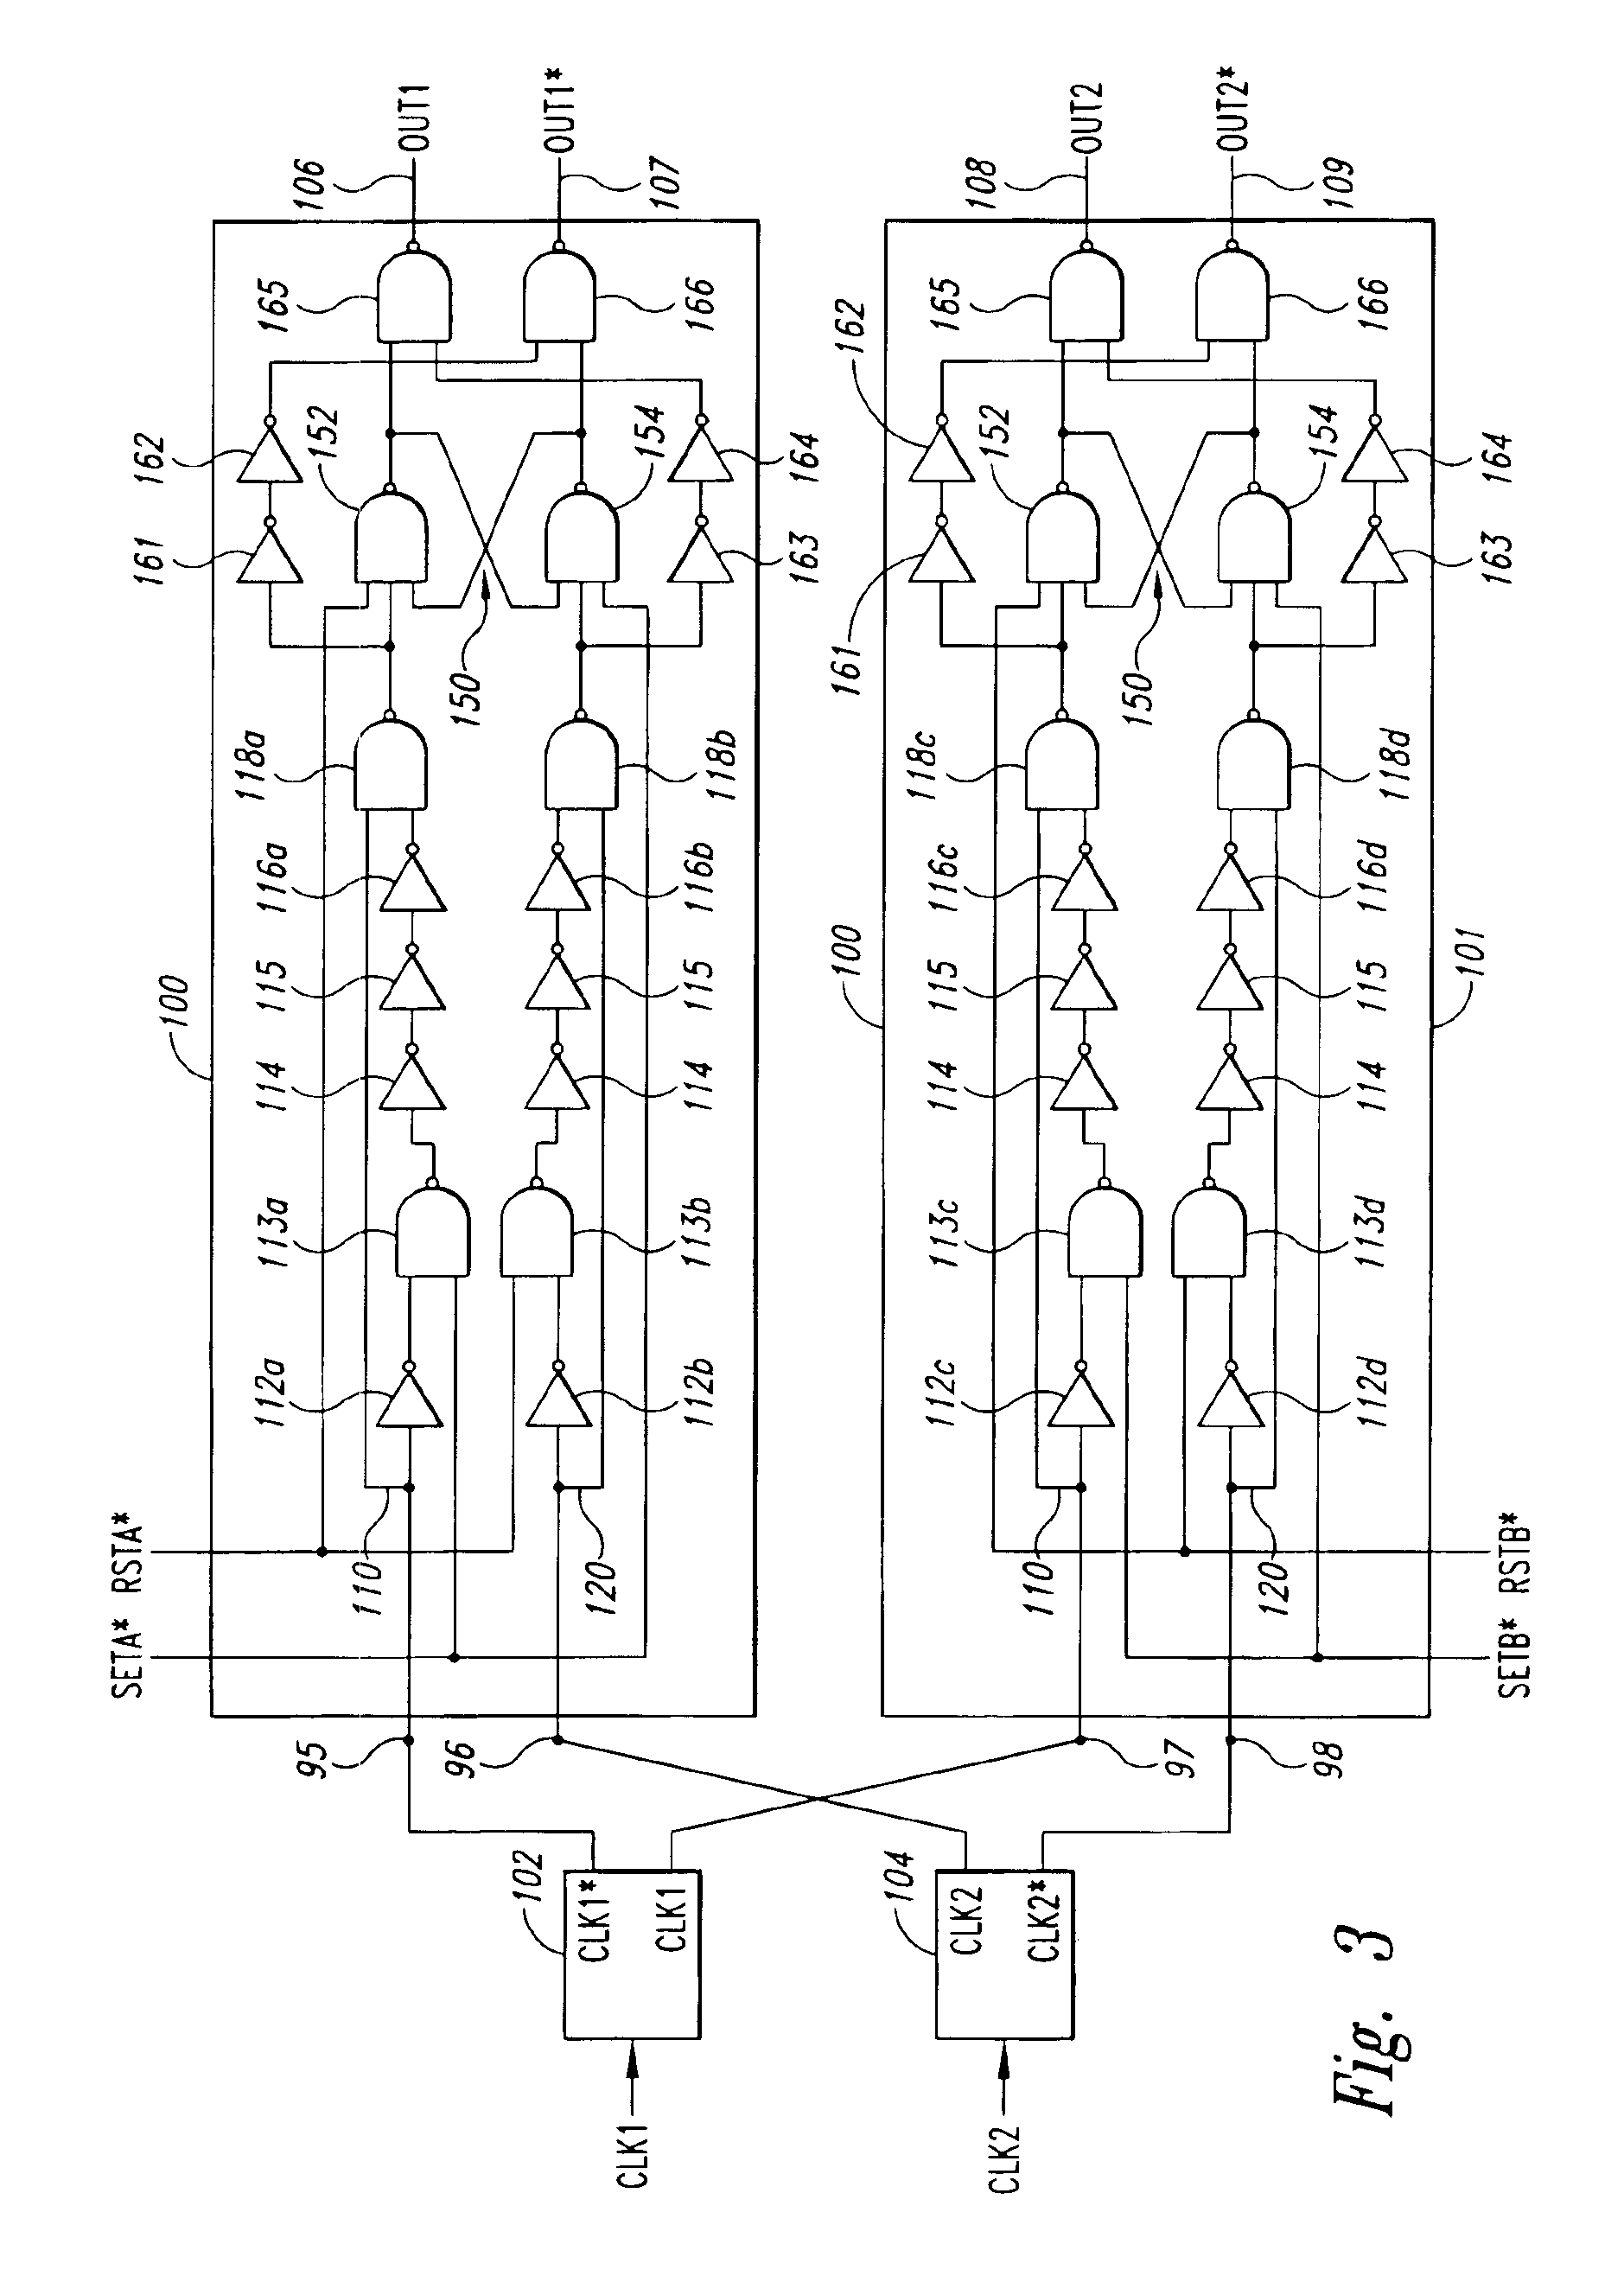 Method and apparatus for generating a phase dependent control signal